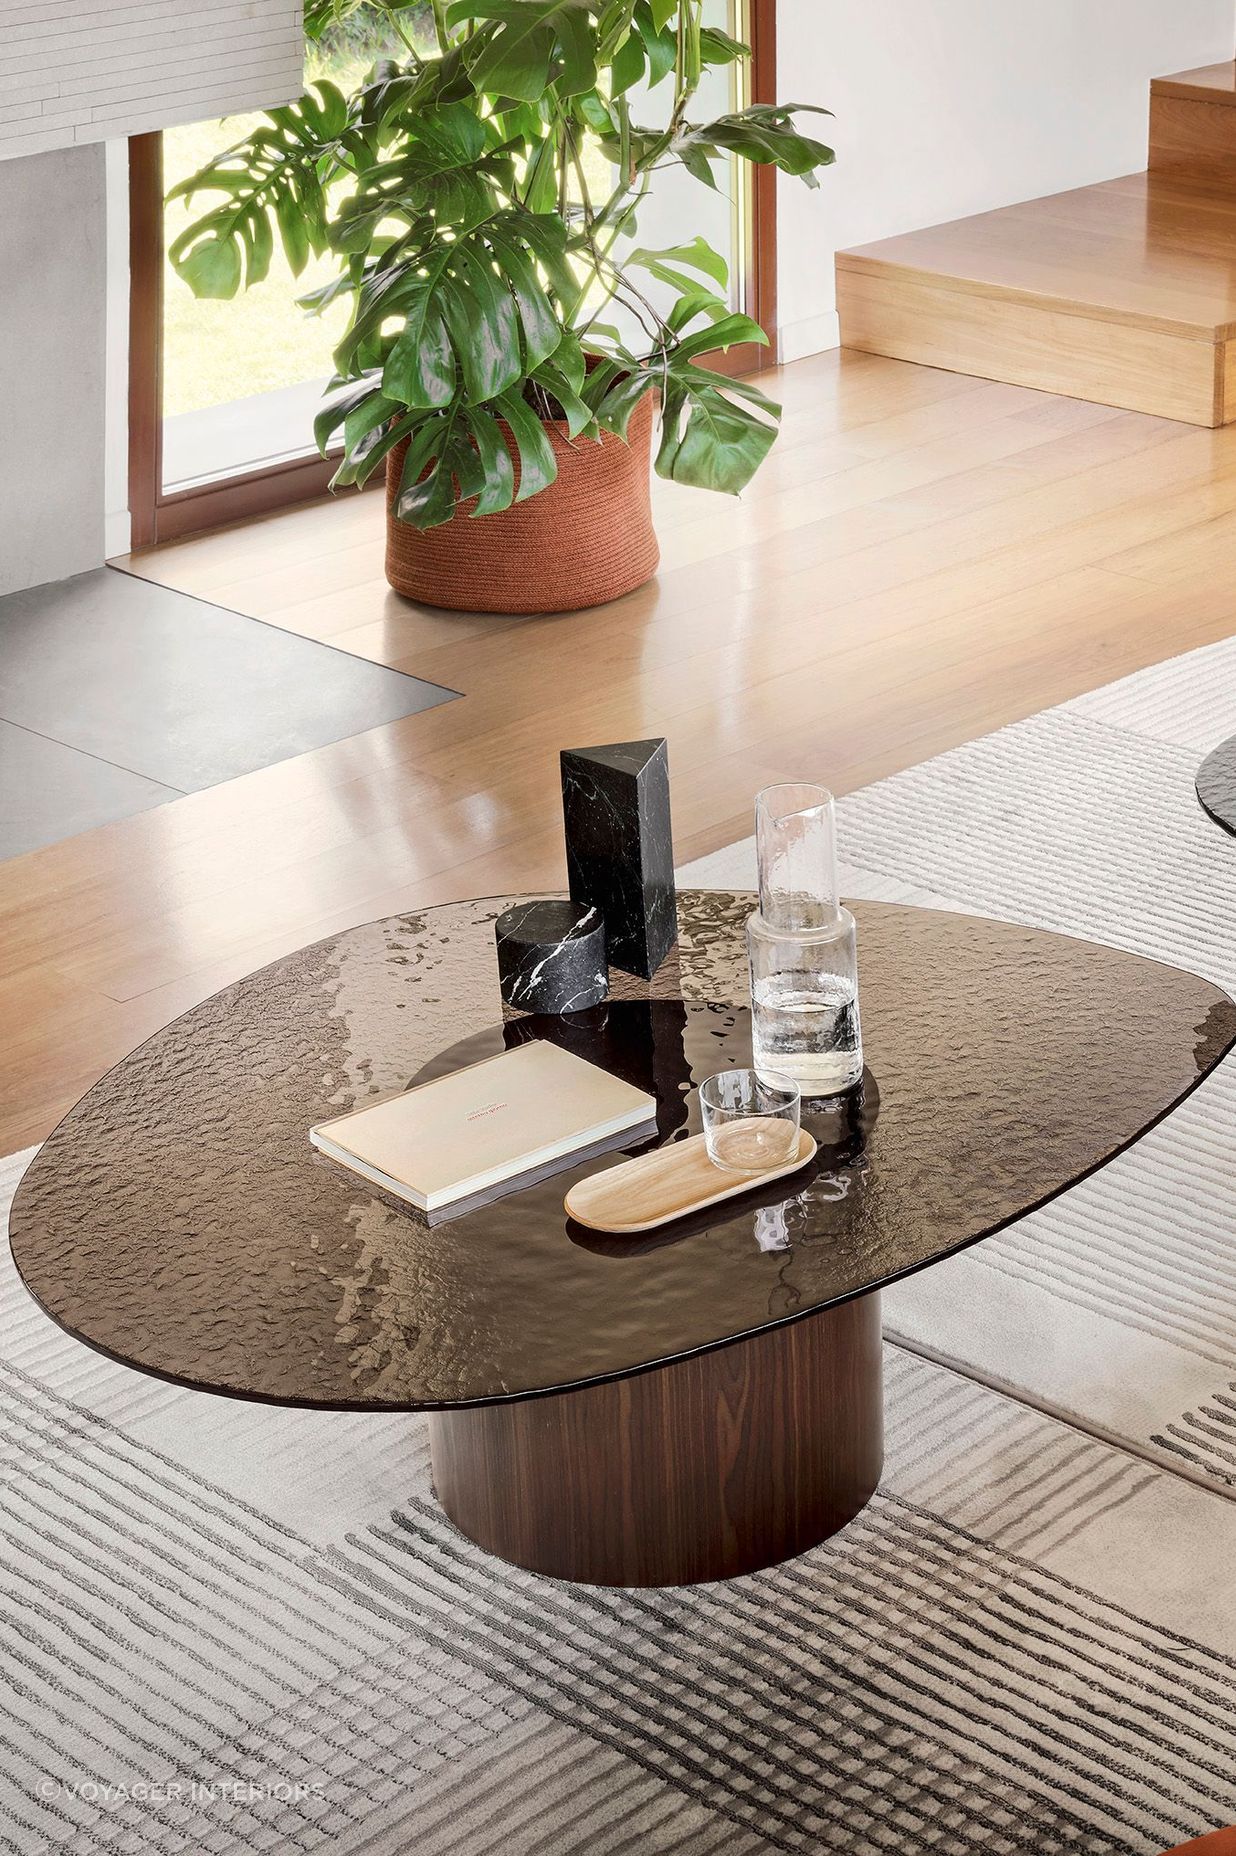 This textured glass tabletop brings this coffee table a unique look and texture.